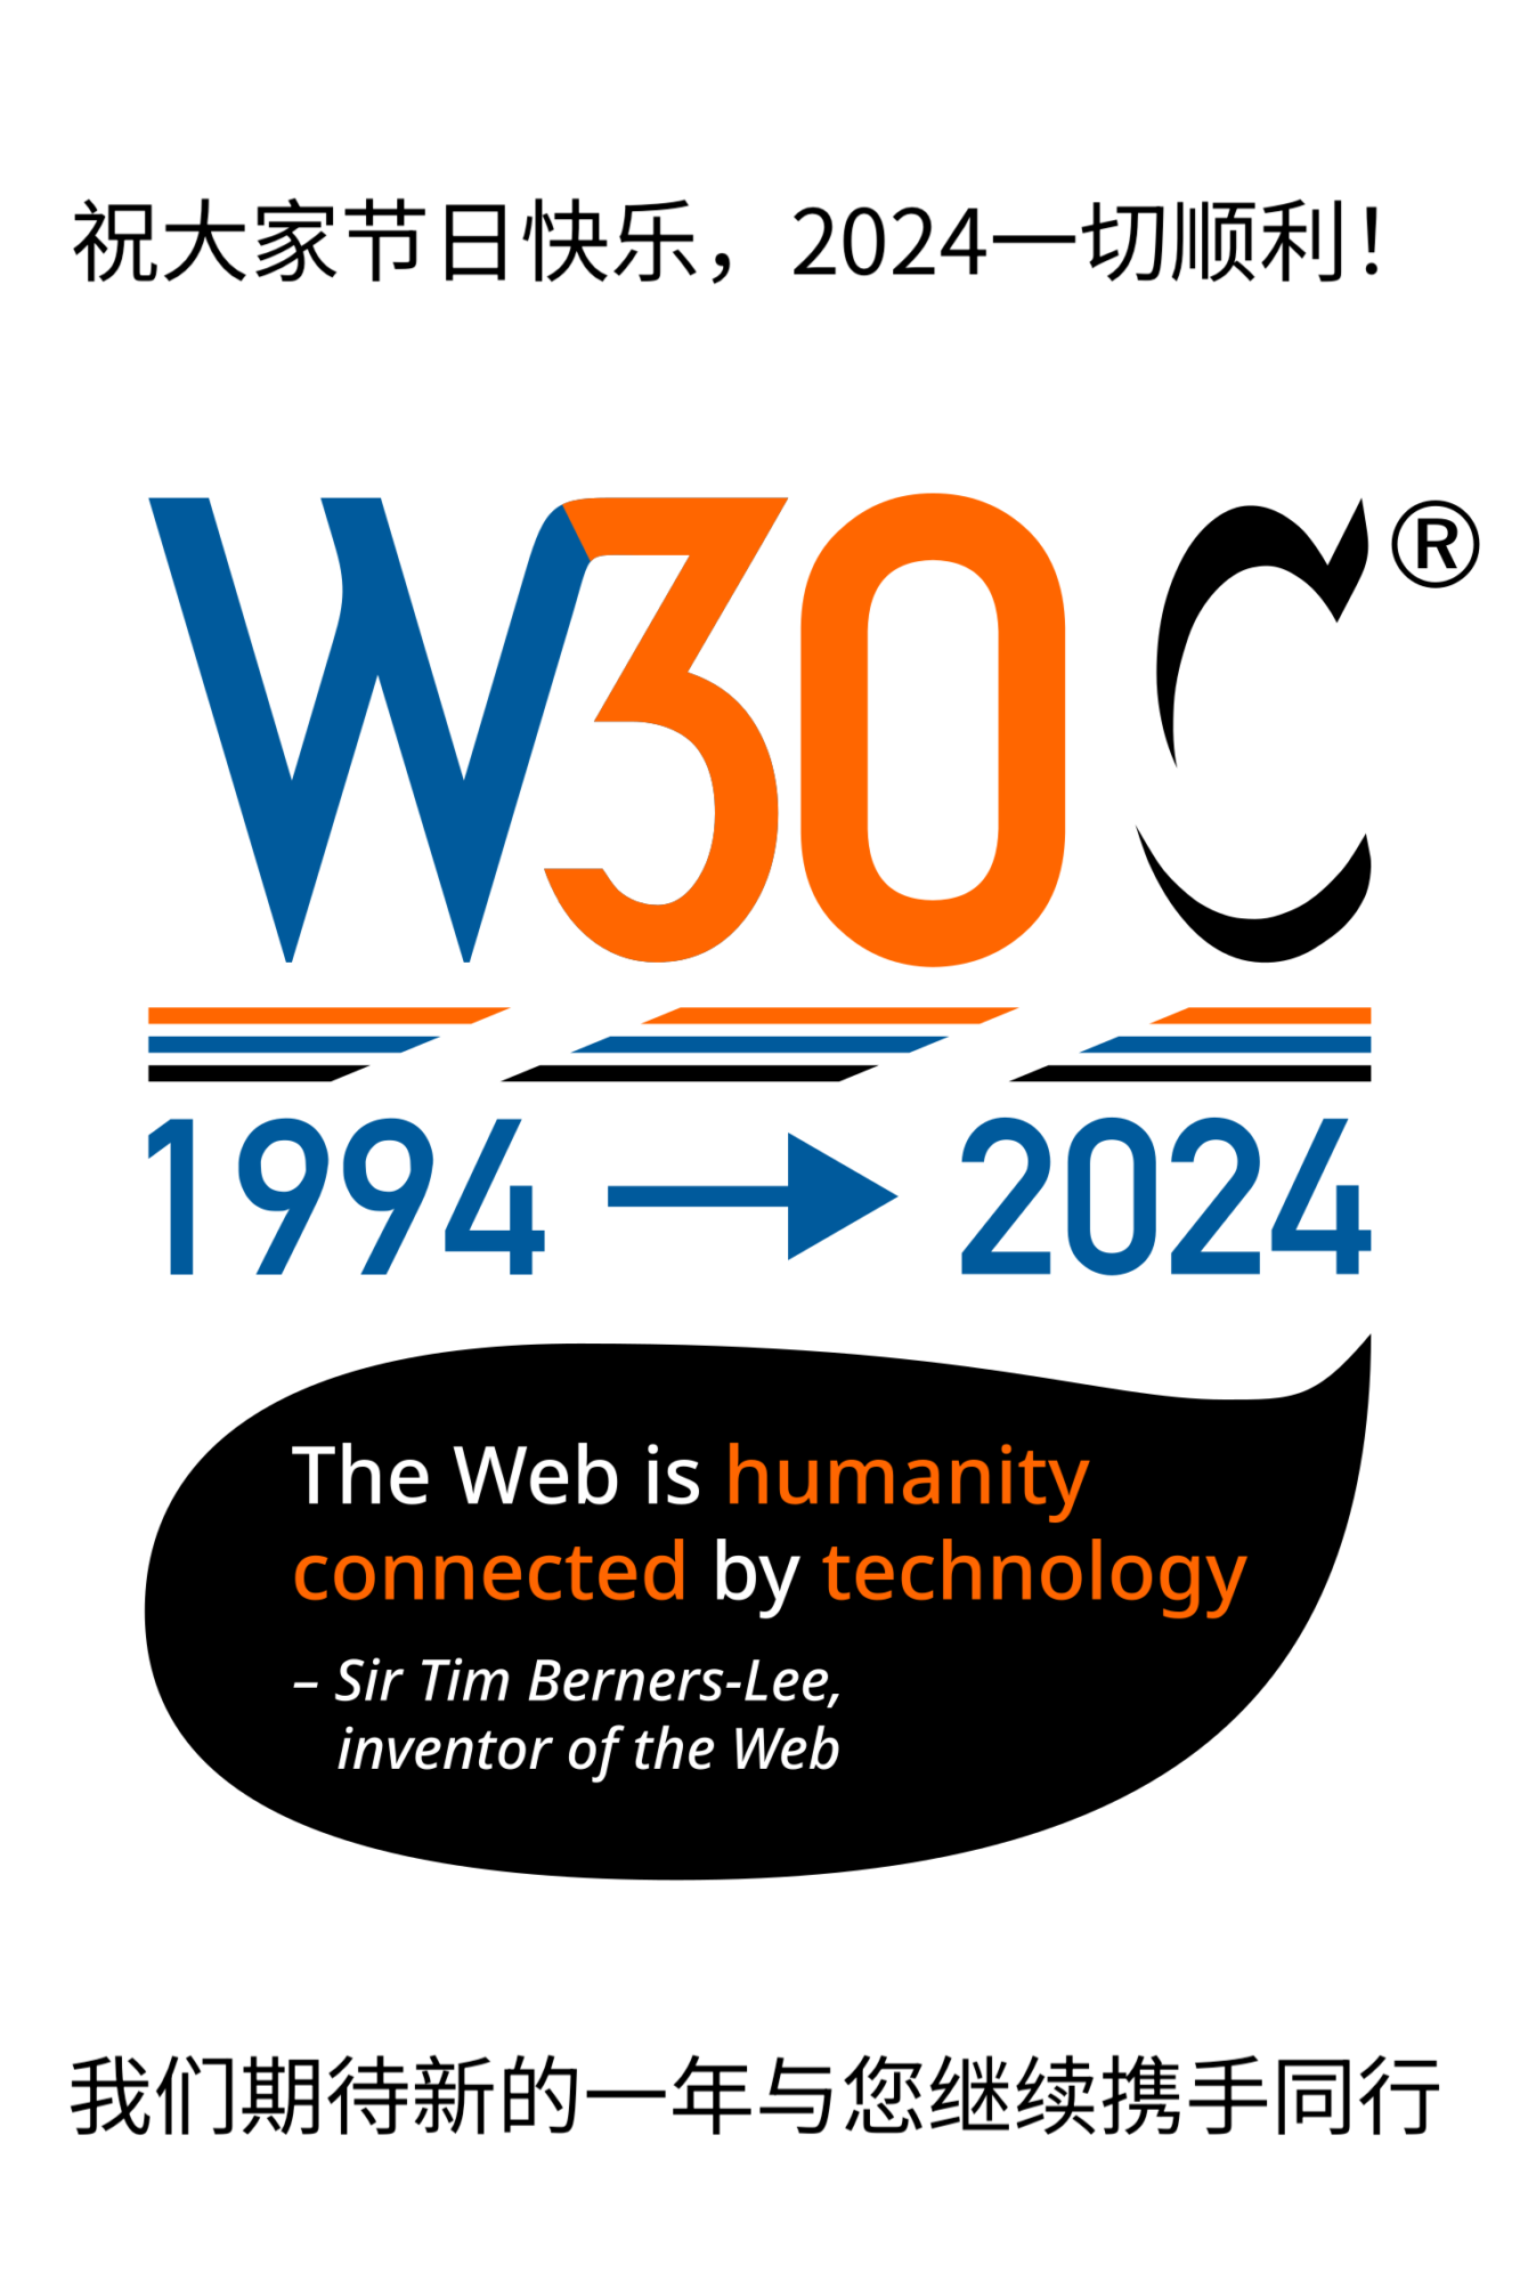 "W3C 30周年纪念logo，W30C (1994-2024)；引用 Tim Berners-Lee 的话：“the web is humanity connected by technology” ；来自 W3C 的祝福语。"